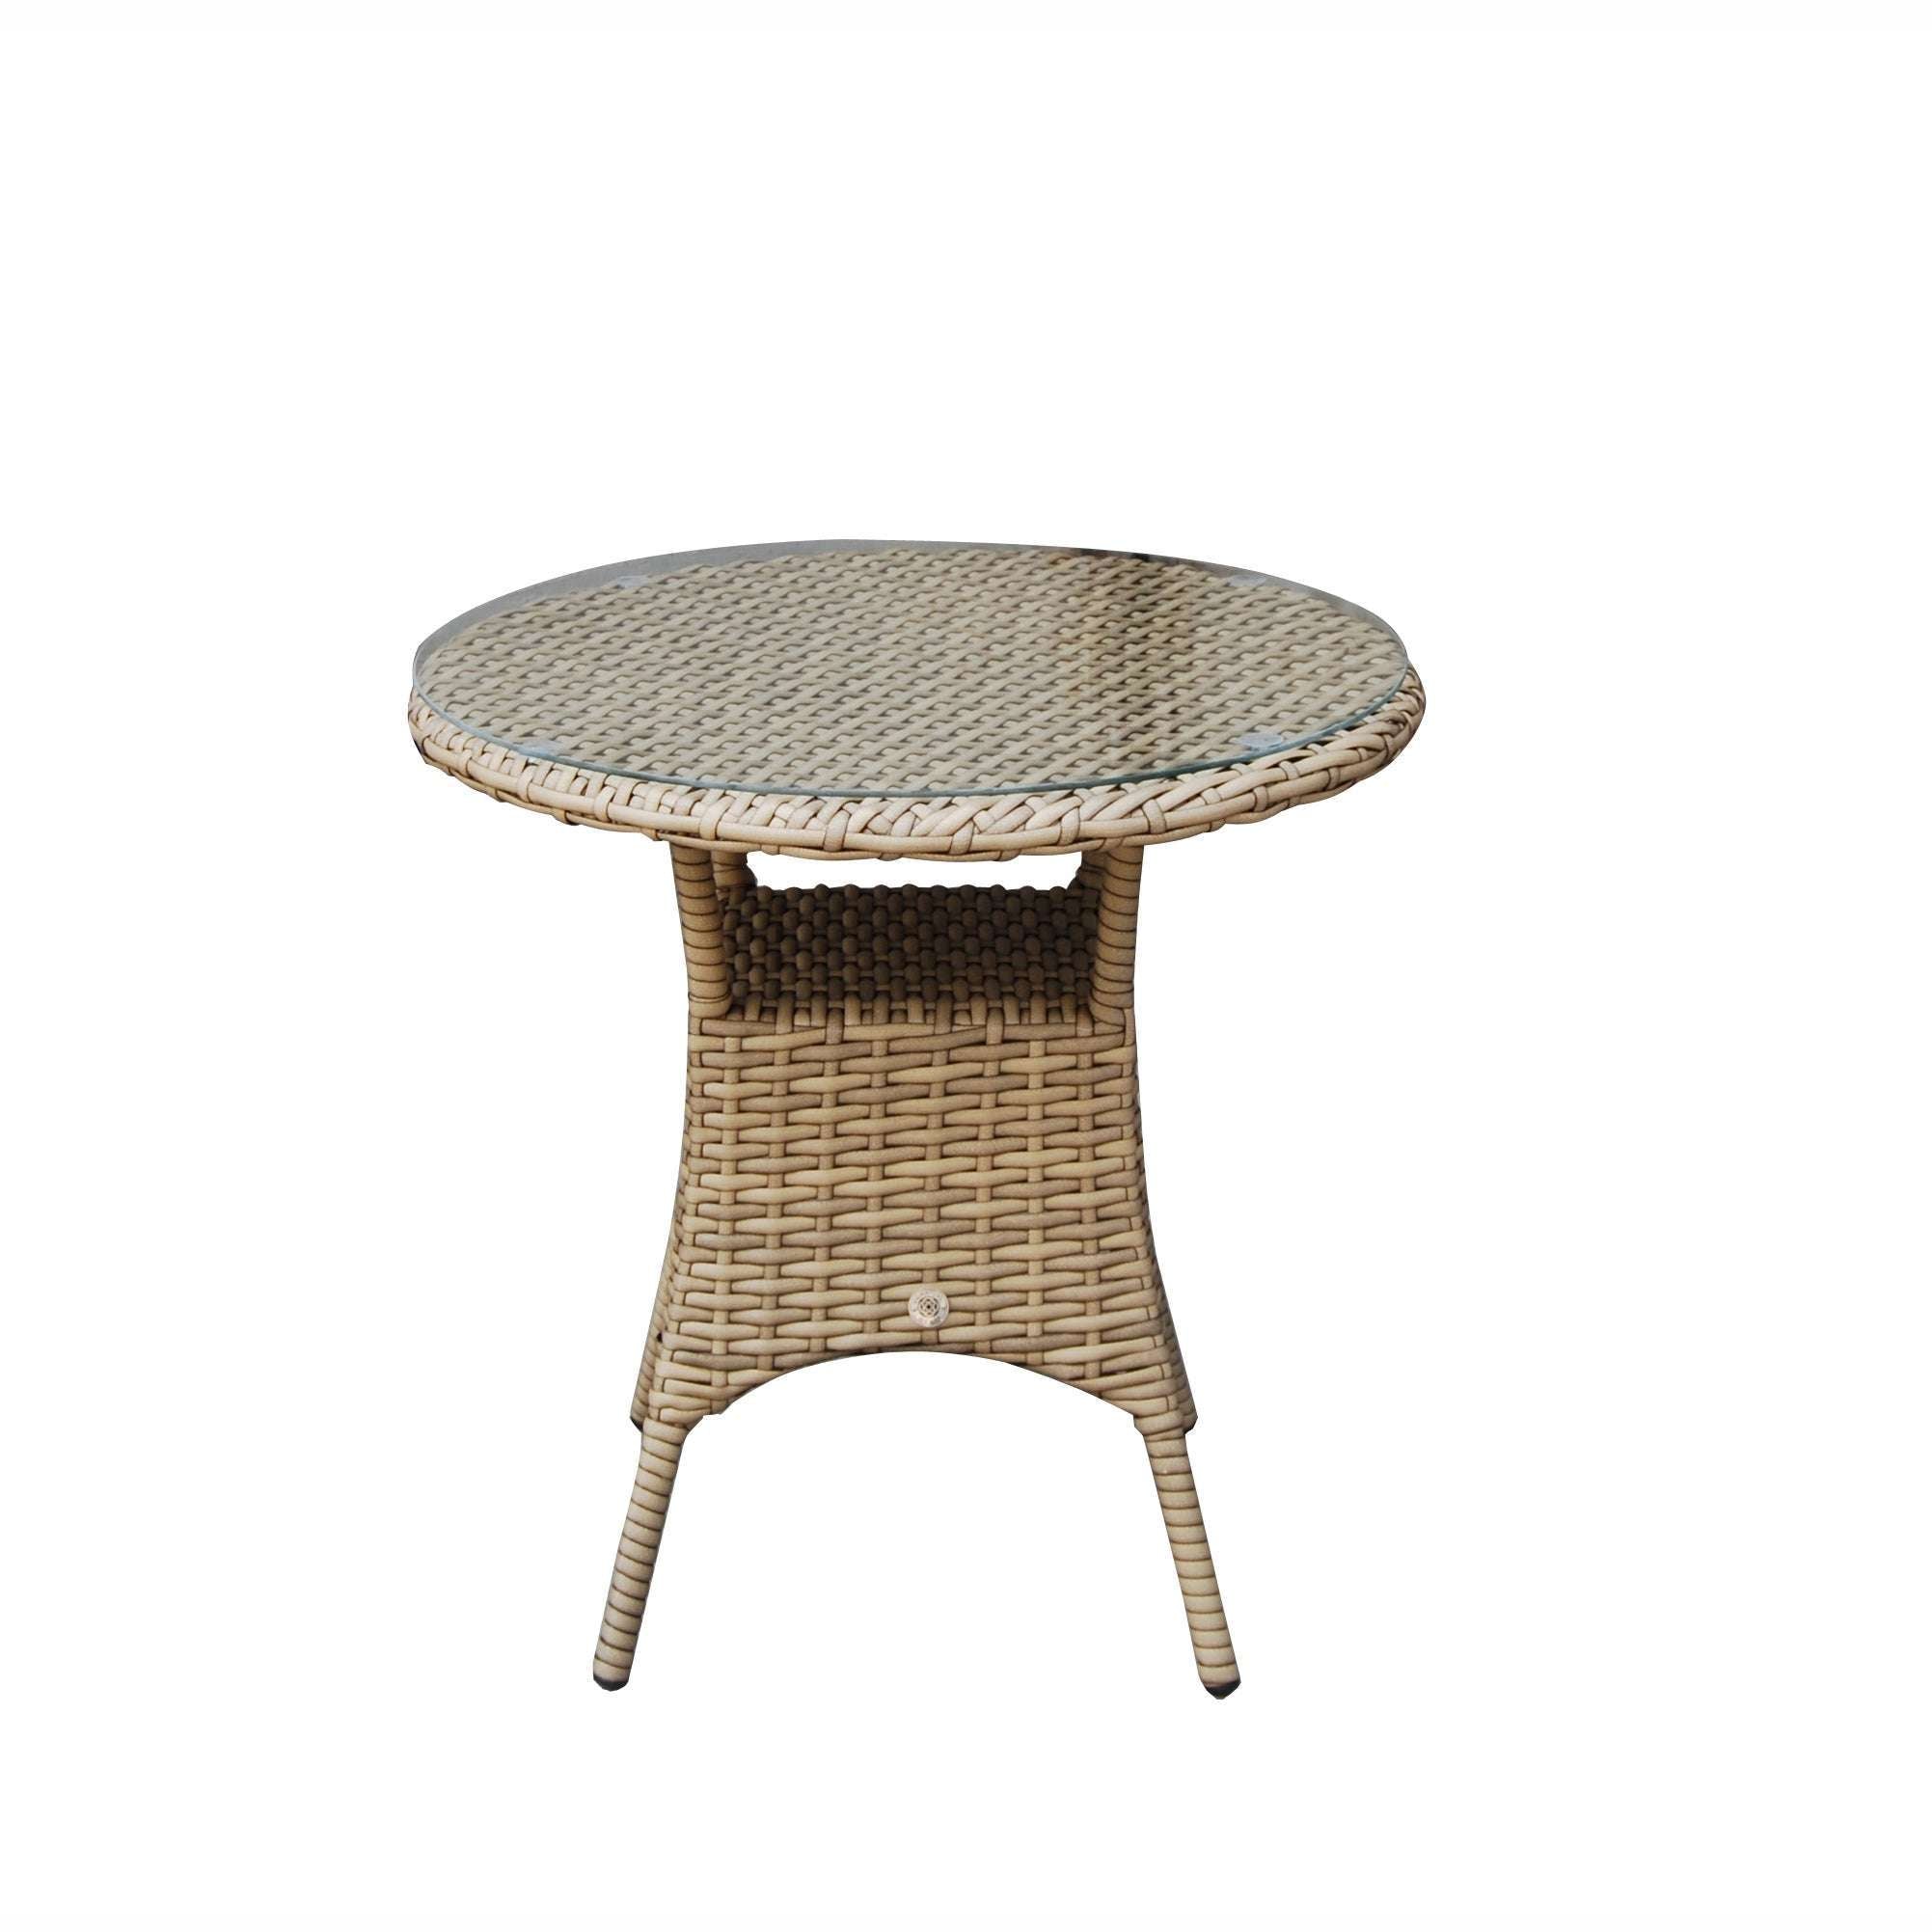 Exceptional Garden:Signature Weave Darcey Bistro Set with Stacking Chairs